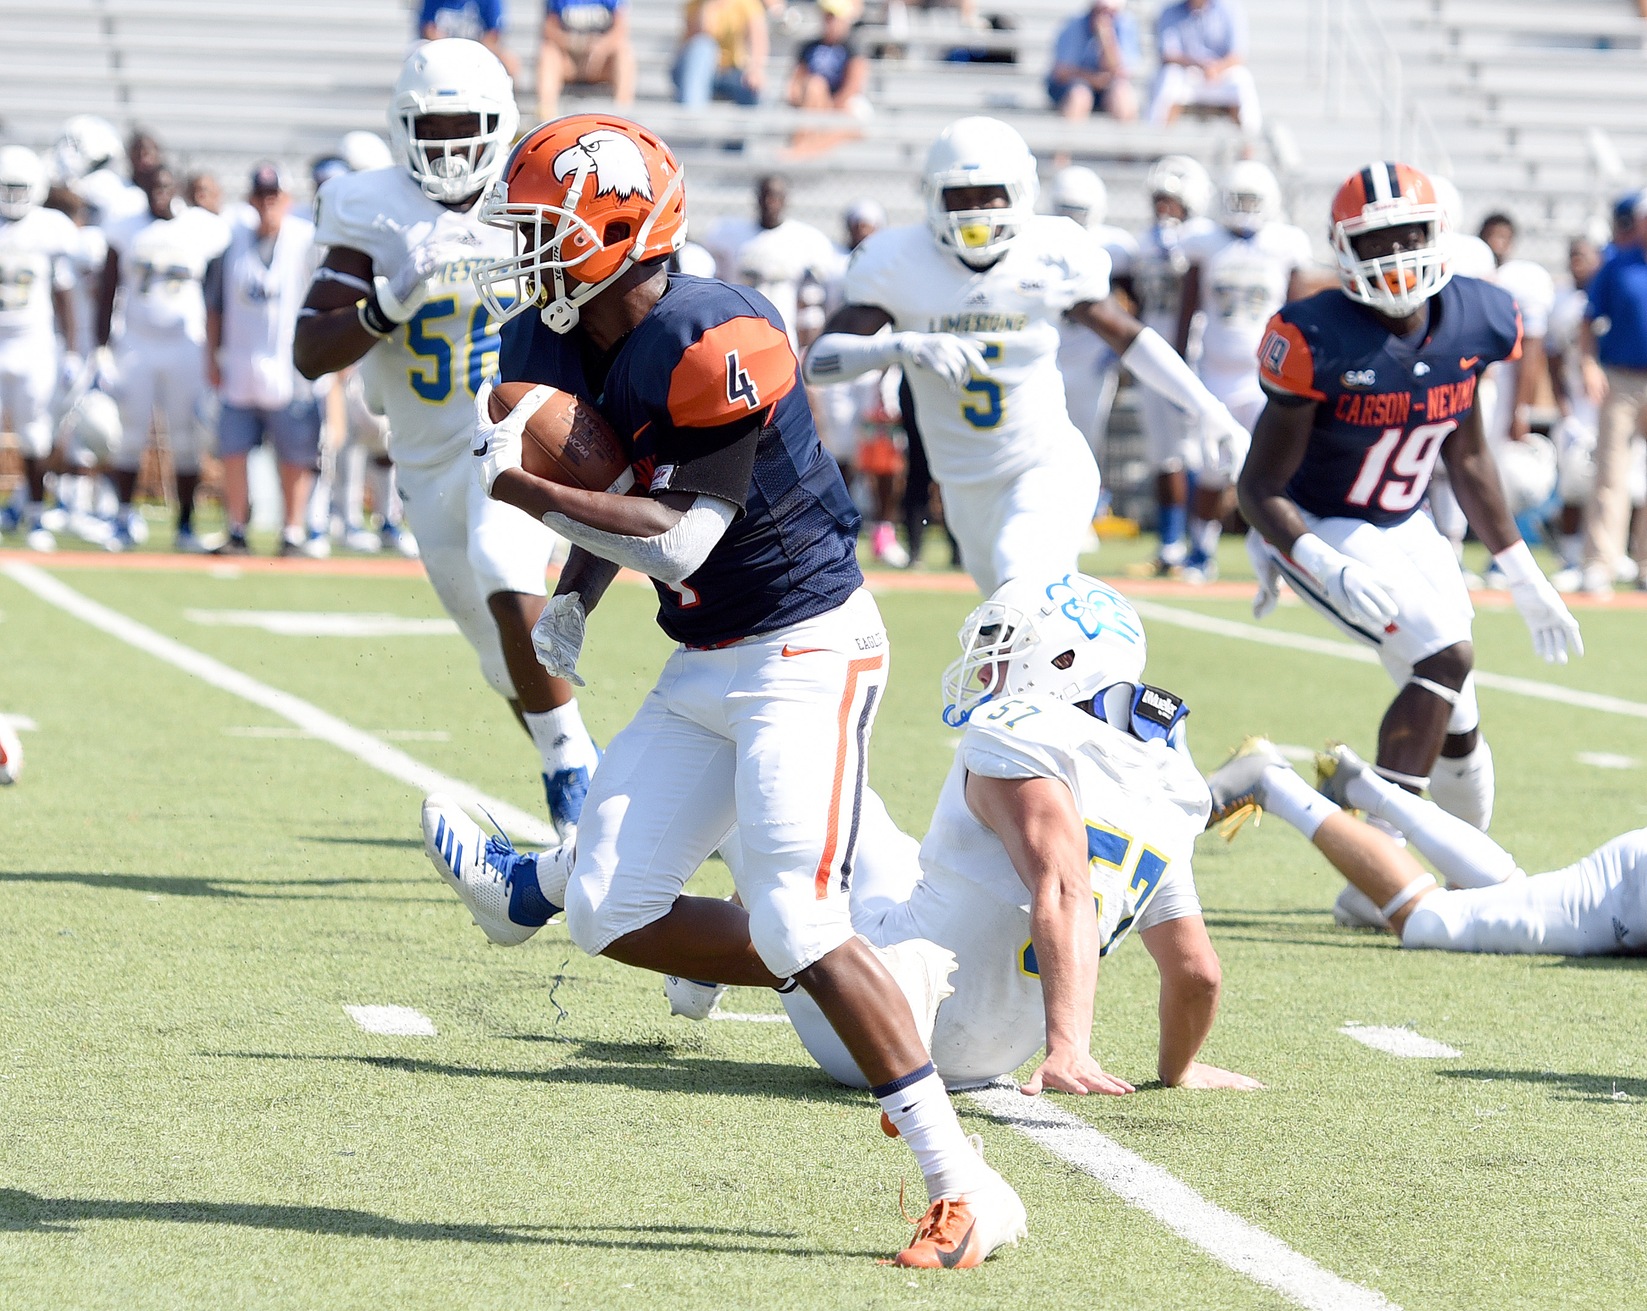 Carson-Newman matches wits with high-flying Mars Hill attack for Homecoming Saturday